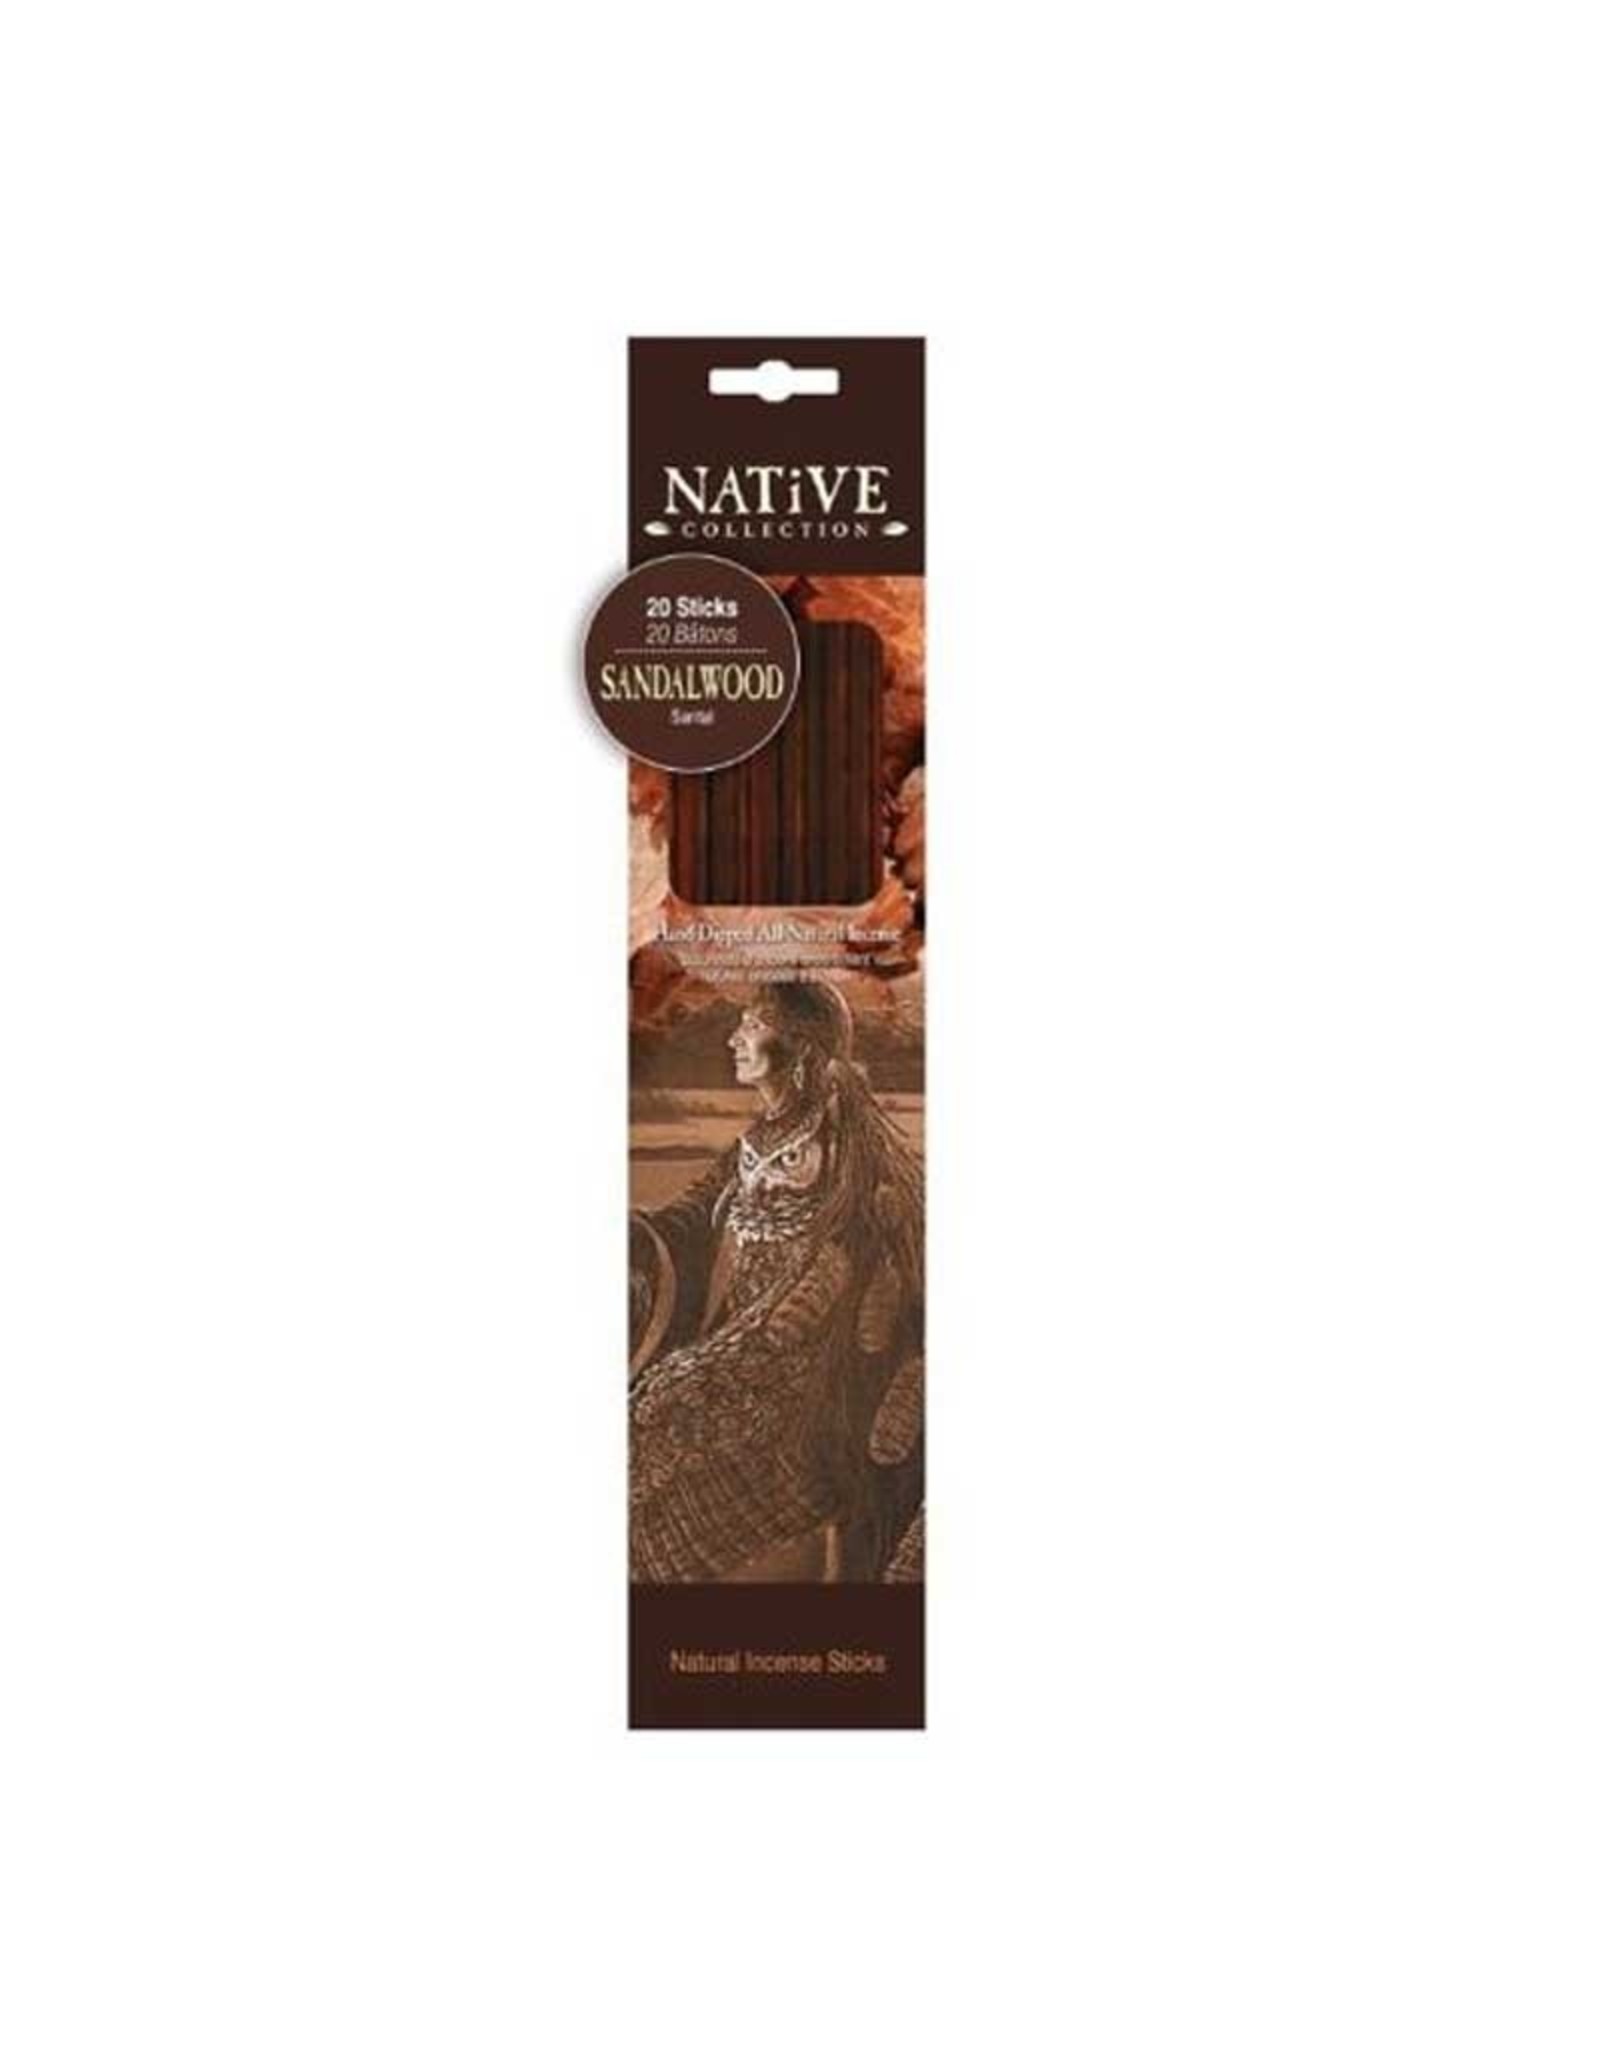 Native Collection Sandalwood Native Collection Incense Sticks